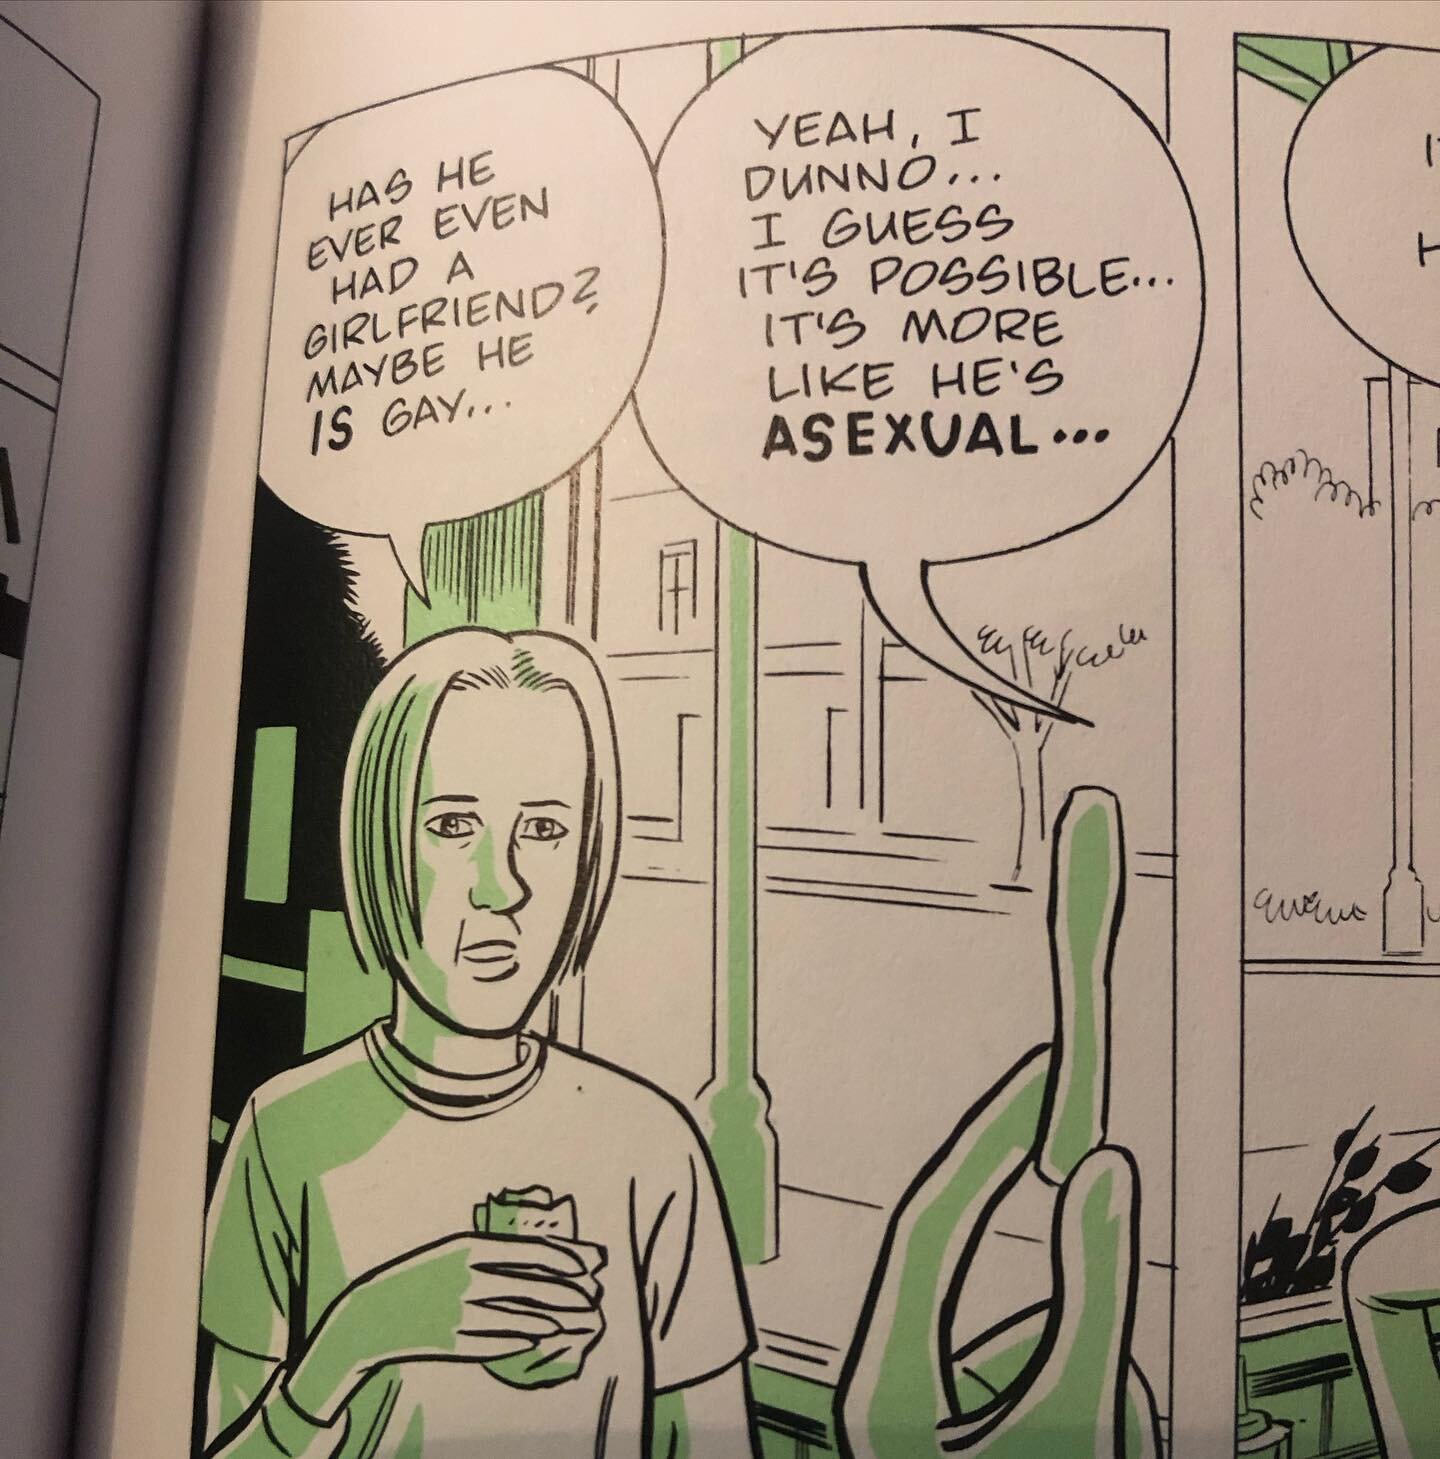 No idea why soph and I loved this!! 

ID some panels from the Ghost World graphic novel that are queer

#podcast #graphicnovel #ghostworld #queer #lesbian #asexual